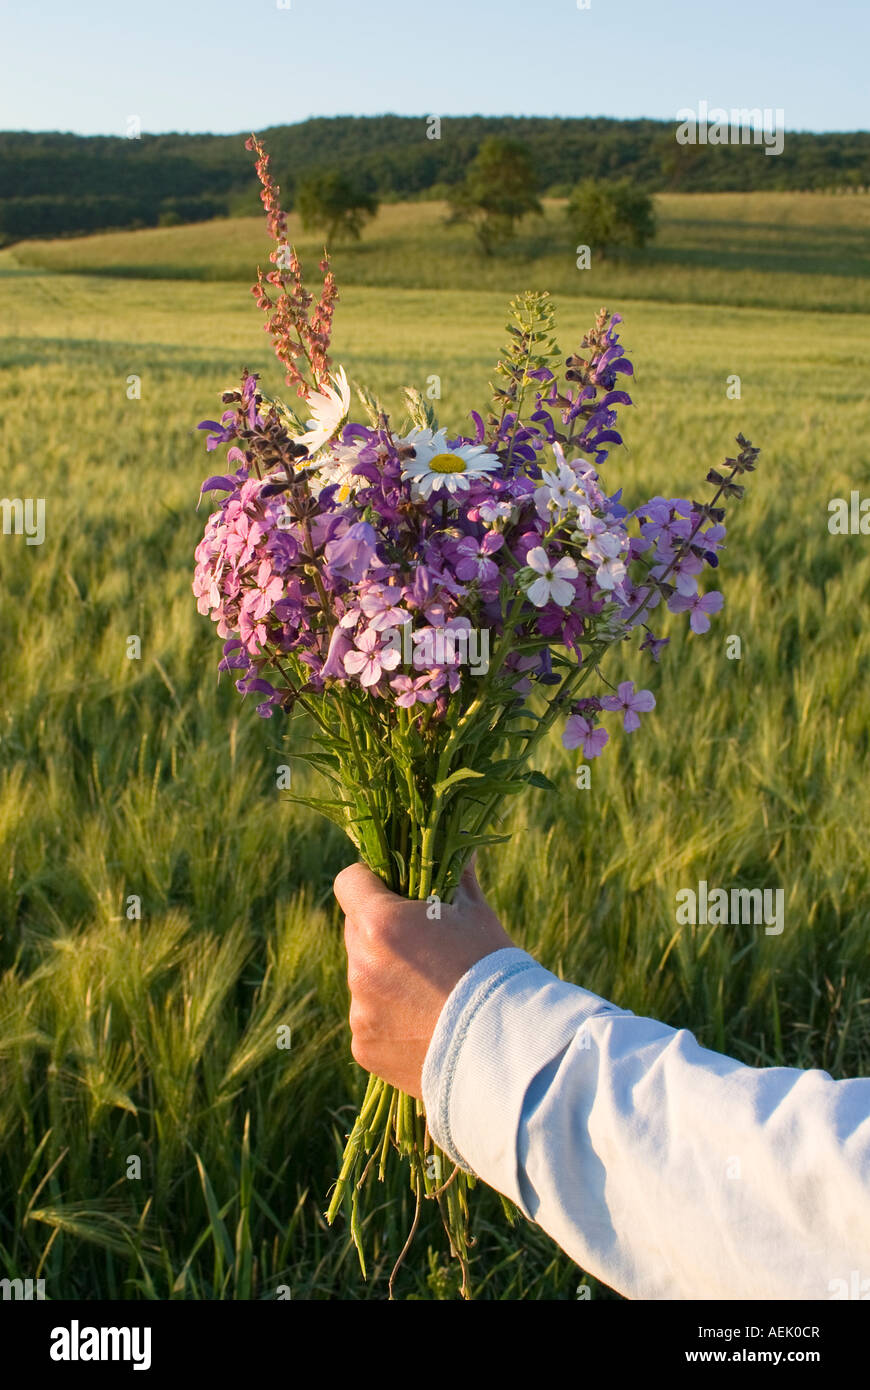 Picked bunch of flowers in spring, Franconia, Bavaria, Germany Stock Photo